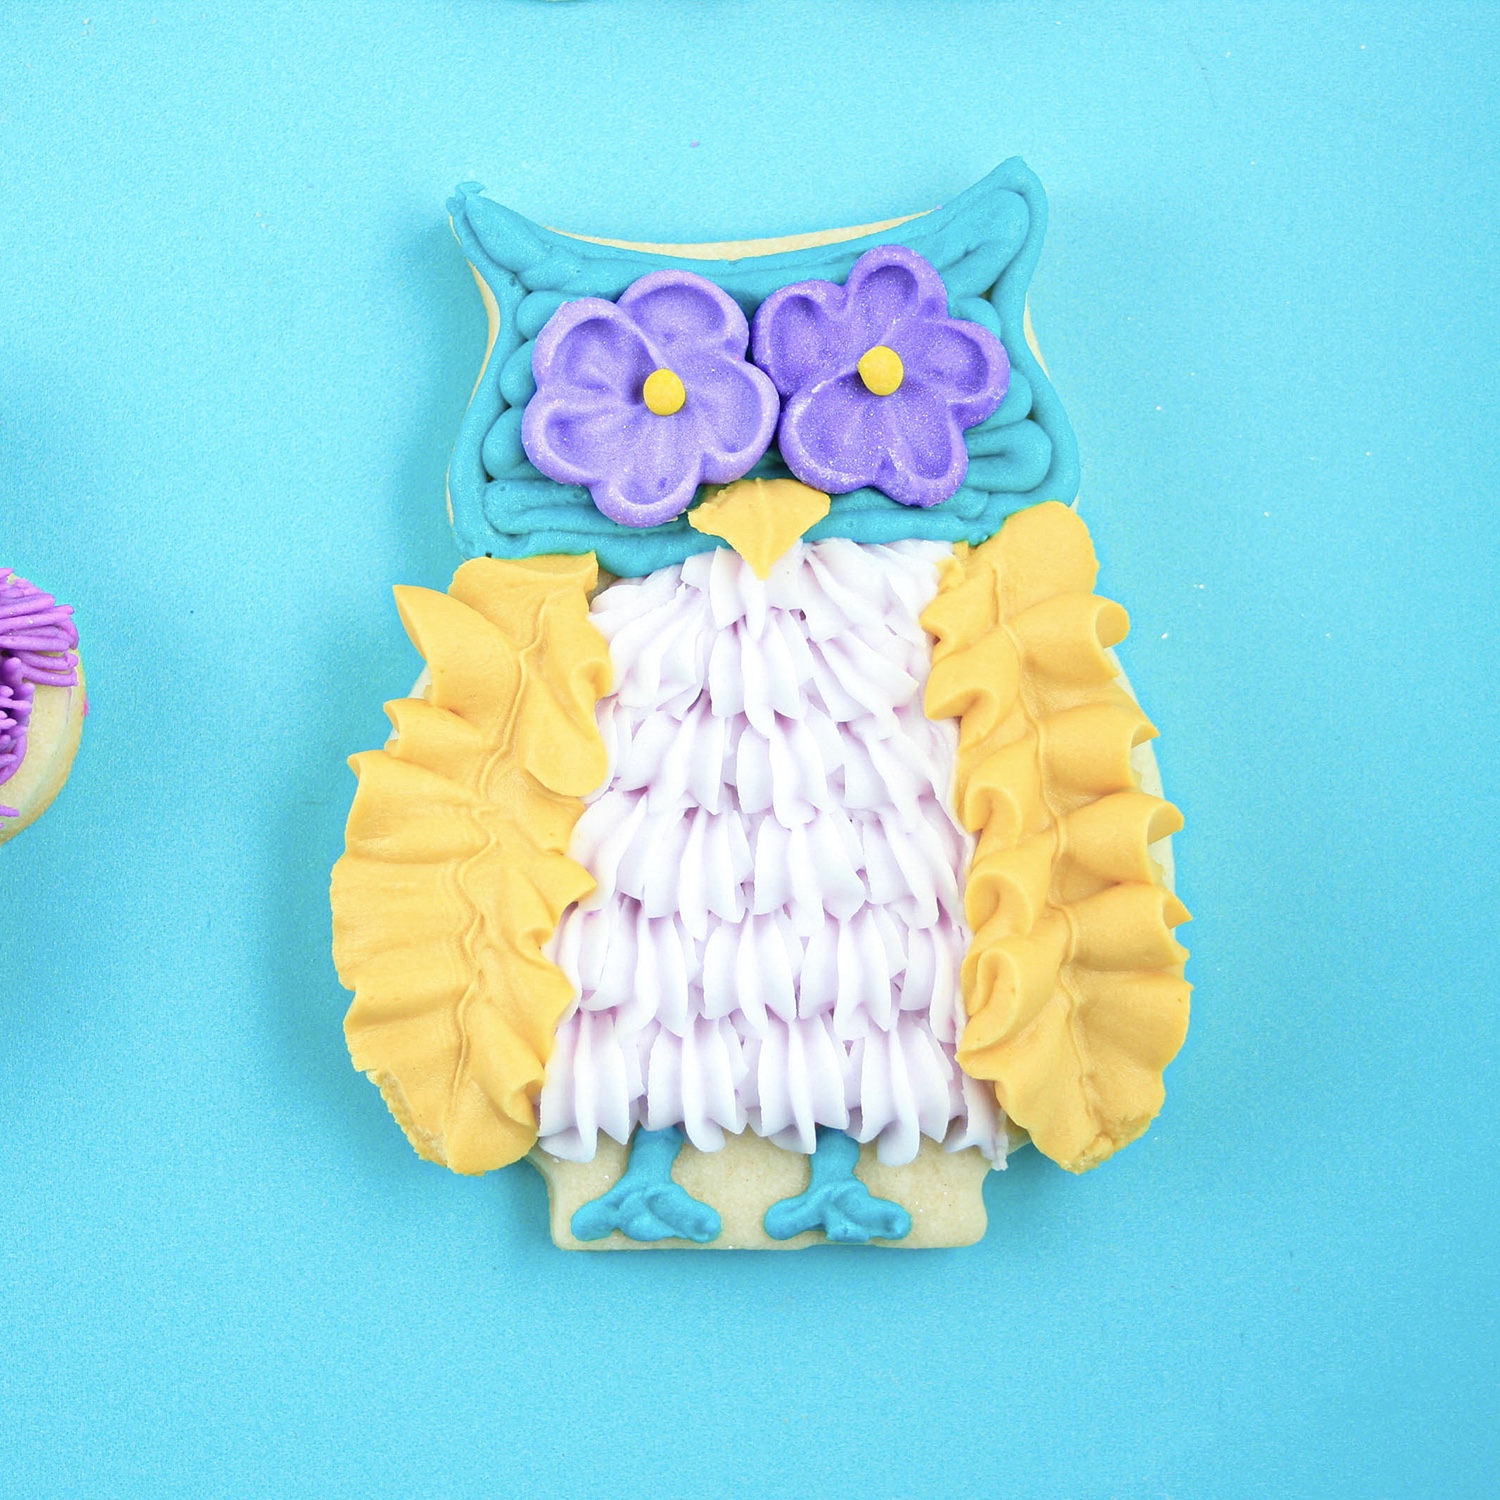 Owl Cookie decorated with buttercream ruffles